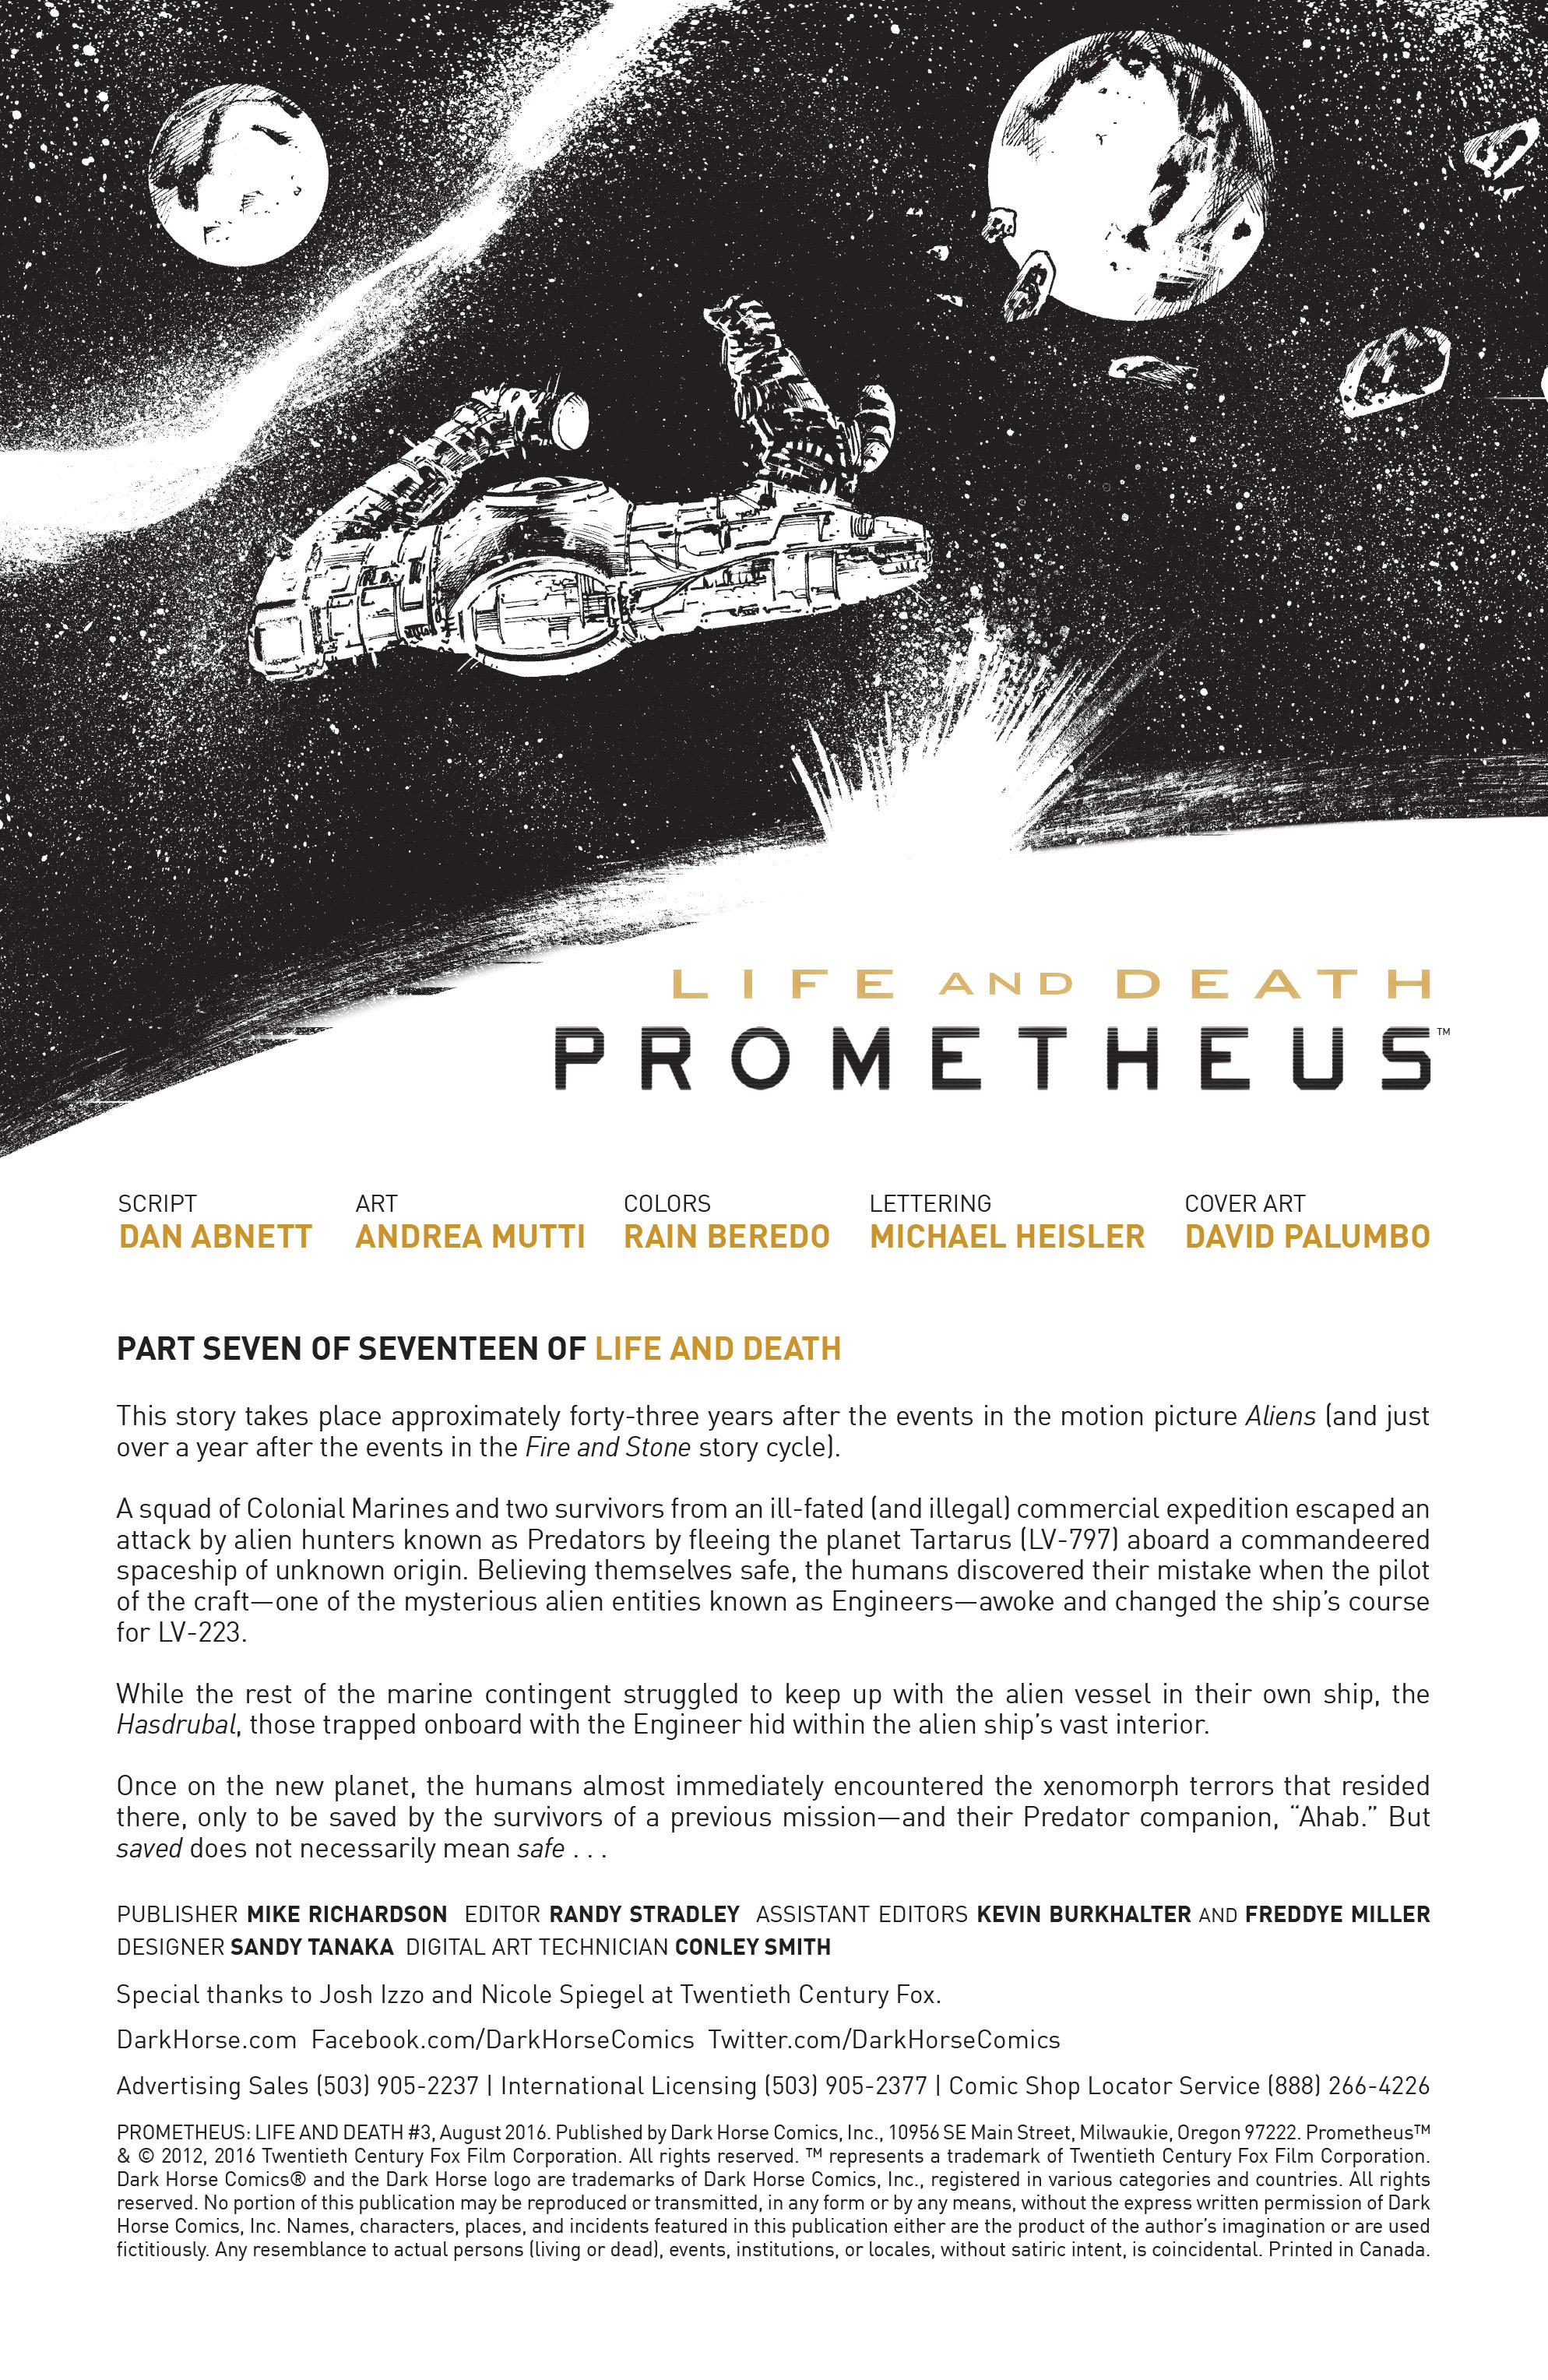 Read online Prometheus: Life and Death comic -  Issue #3 - 2